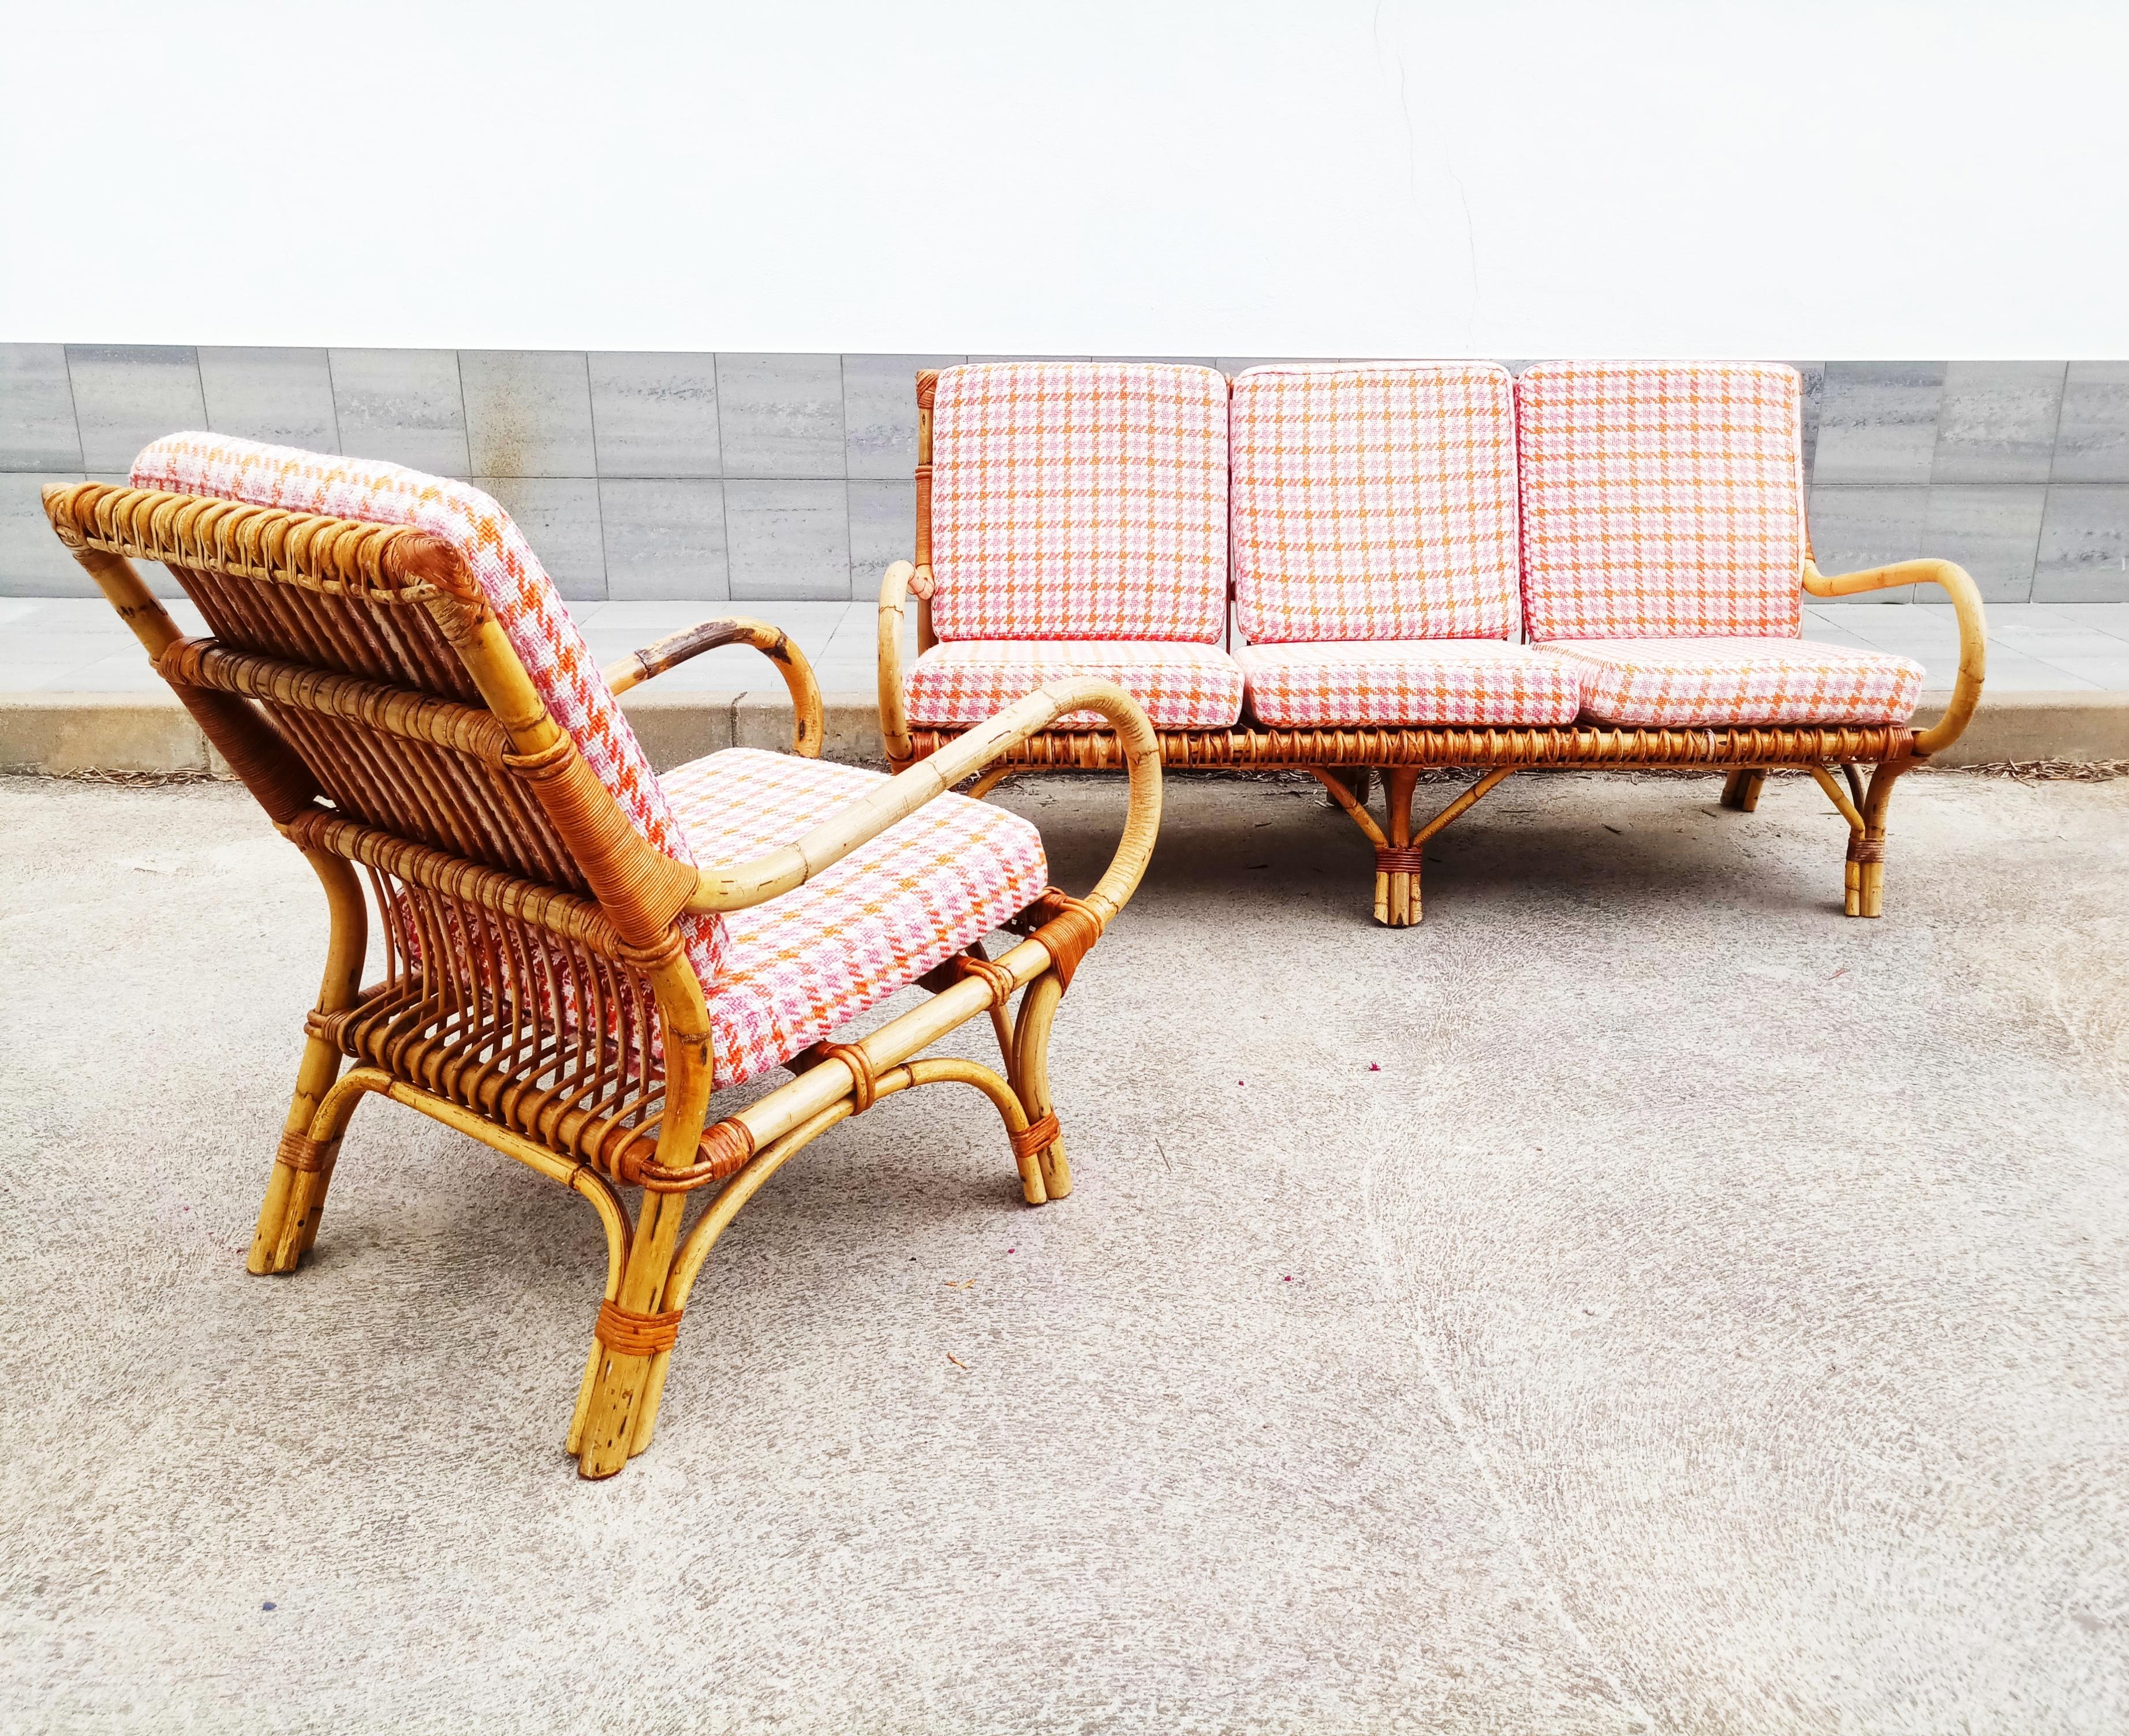 Rare set of armchair and sofa rattan and bamboo manufactured in Italy in 1960s. In very good vintage condition, with all its original cushions and fabrics.
Dimension: (cm)
Sofa 156 W x 80 D x 80 H, seat height 43 with cushion.
Armchair 58 W x 80 D x